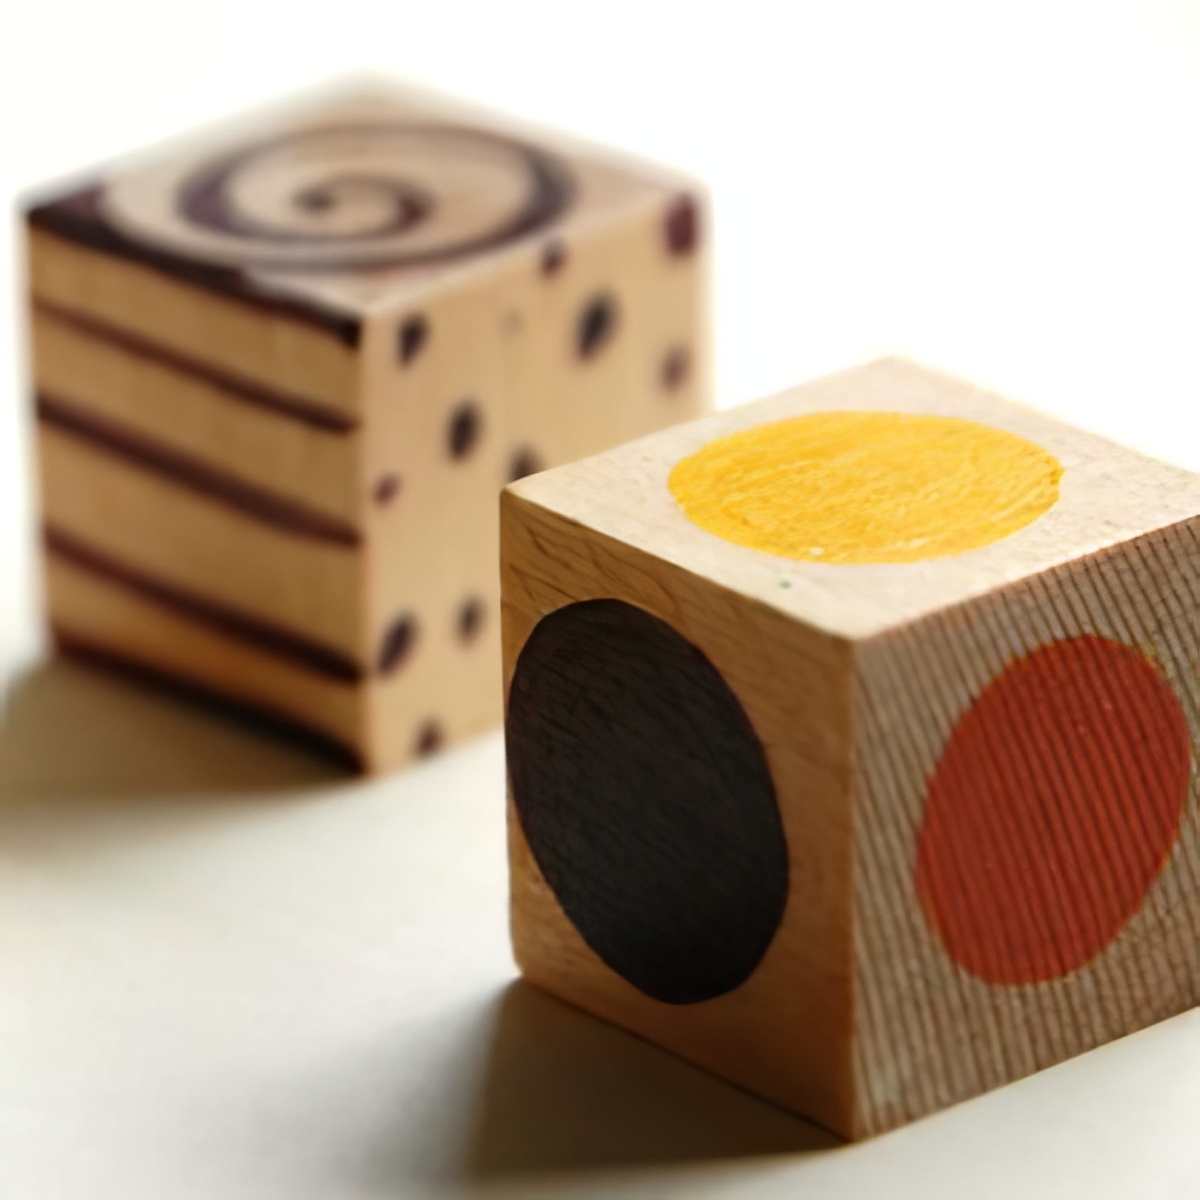 Grabe these colorful homemade dice and add colors as you play board games with your kids indoors!